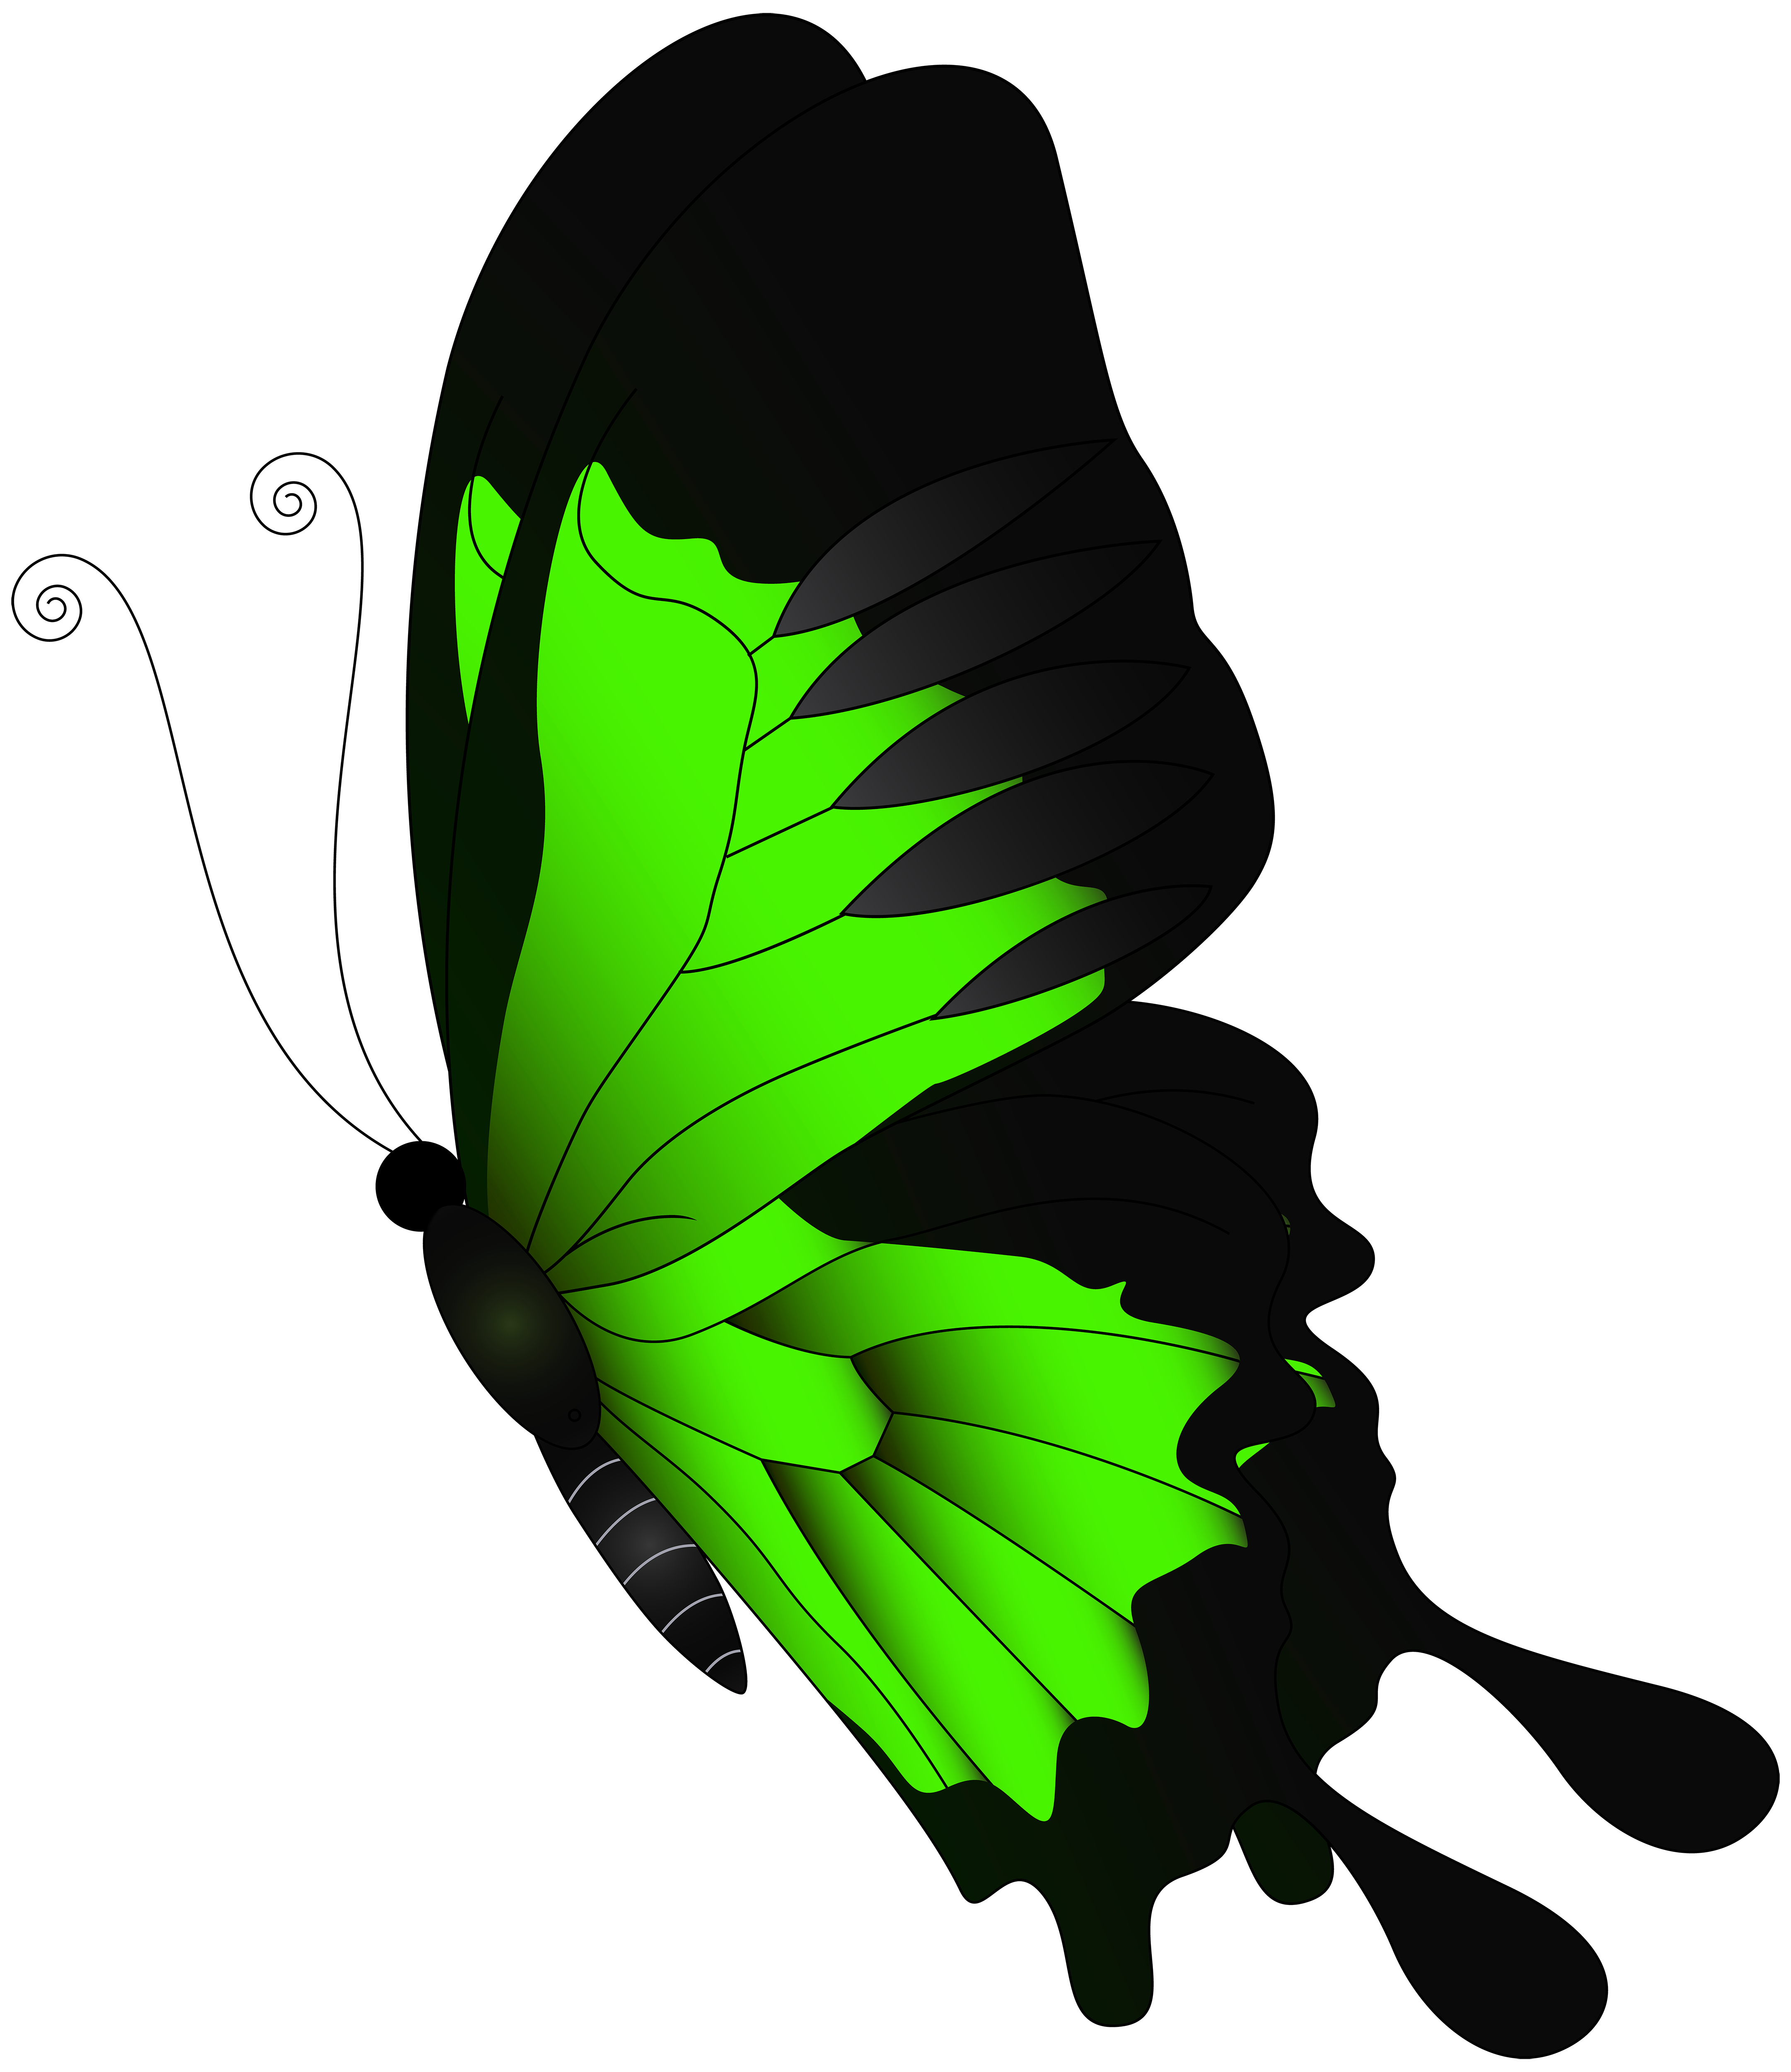 https://gallery.yopriceville.com/var/albums/Free-Clipart-Pictures/Butterflies-PNG/Green_Flying_Butterfly_PNG_Clip_Art.png?m=1507690502